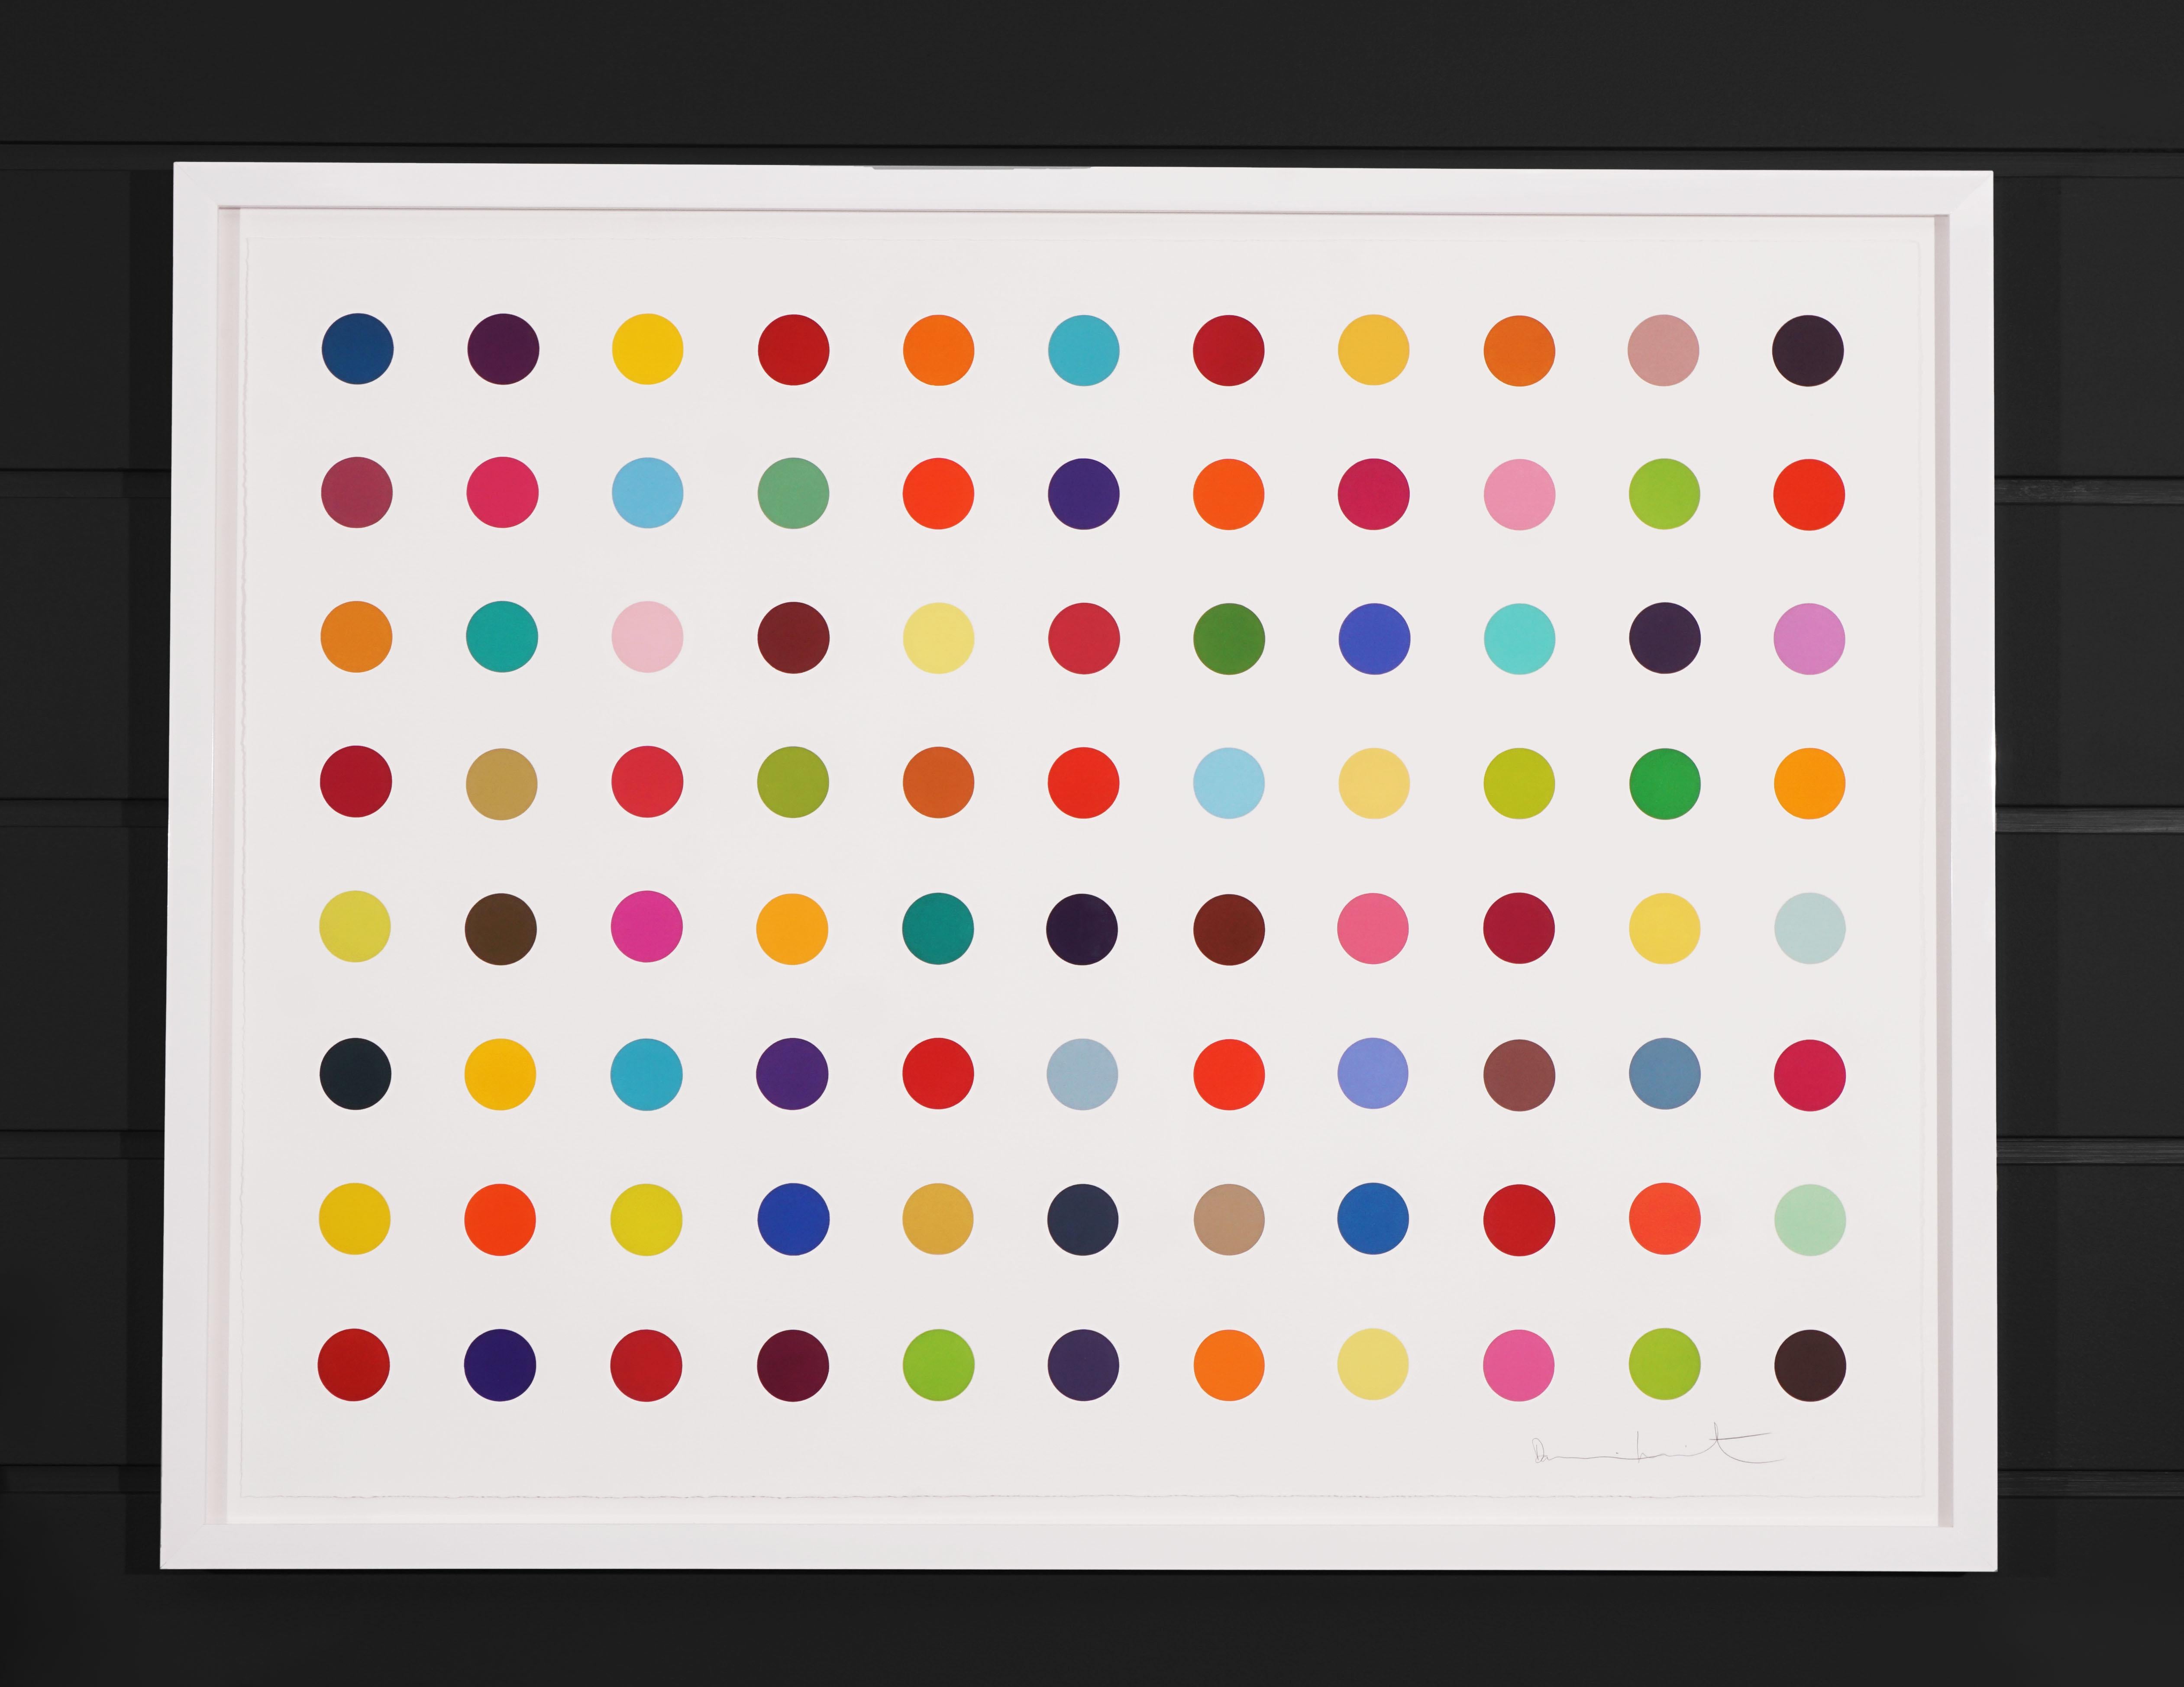 The Horizontal 'Spots' by Damien Hirst is a multi-color woodcut in his signature palette formed with series unique colors. This exquisite piece is created in a limited edition of only 55 in existence. Signed by the artist in pencil in the lower